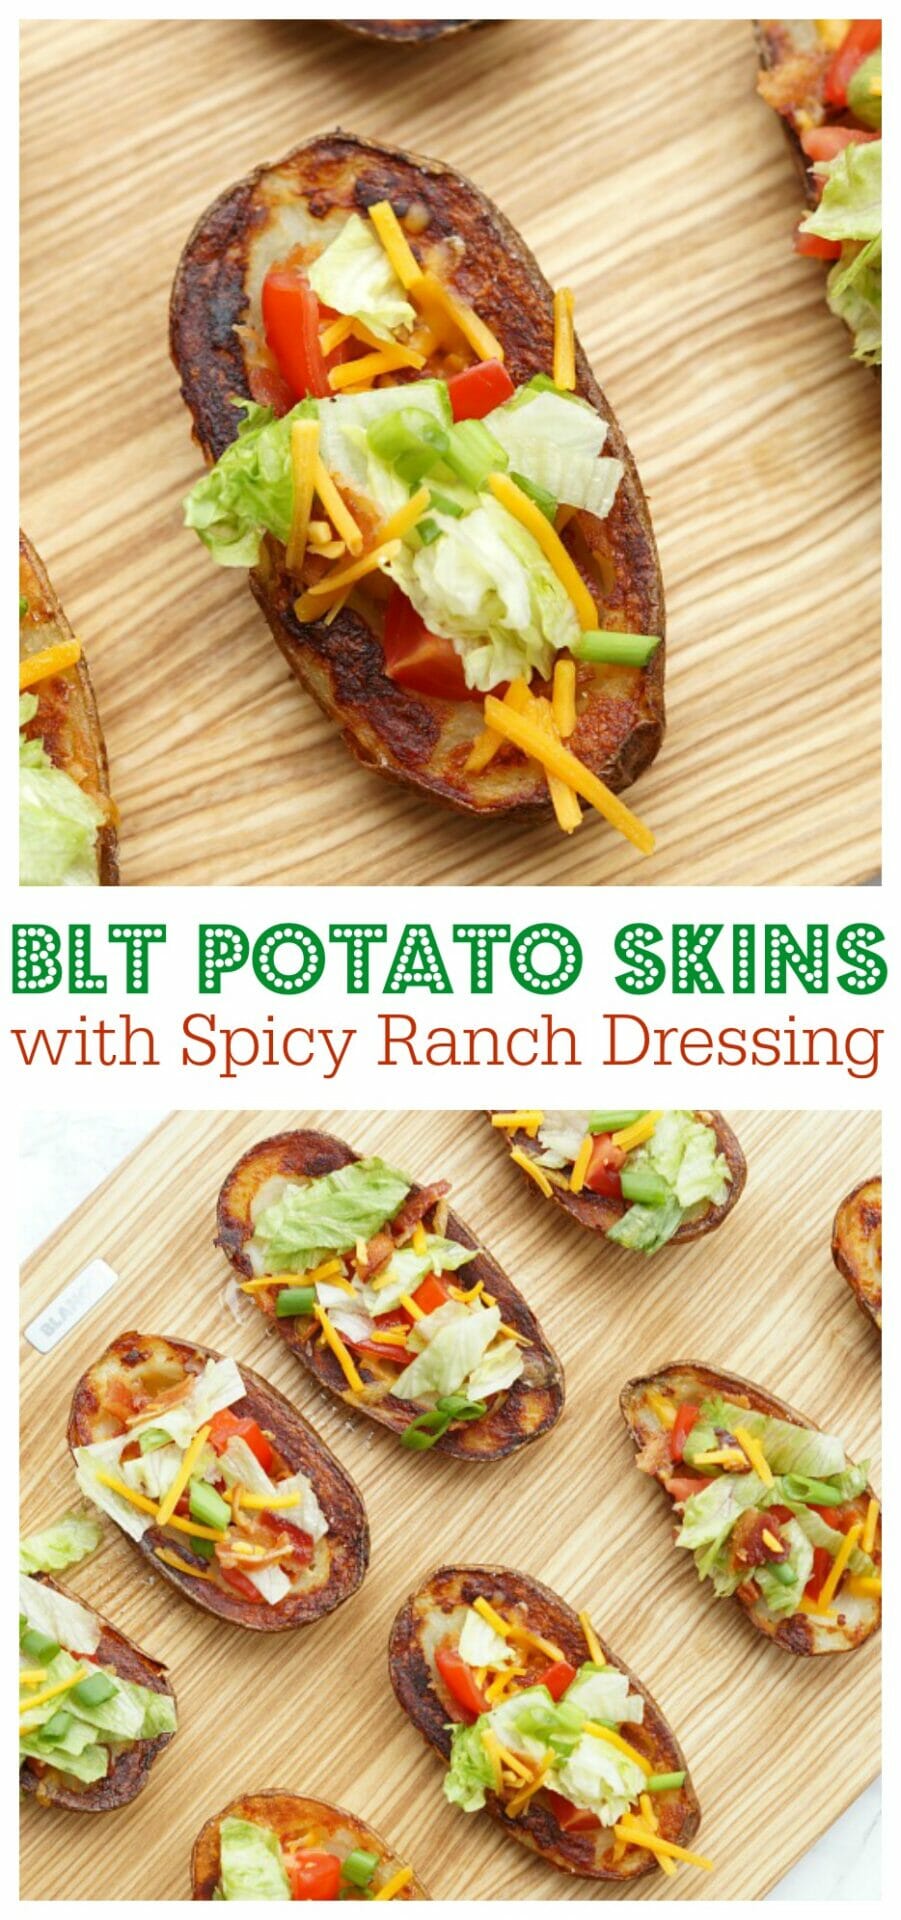 BLT Potato Skins with Spicy Ranch Dressing. A delicious and easy appetizer with cheesy potato skins and BLT toppings! 